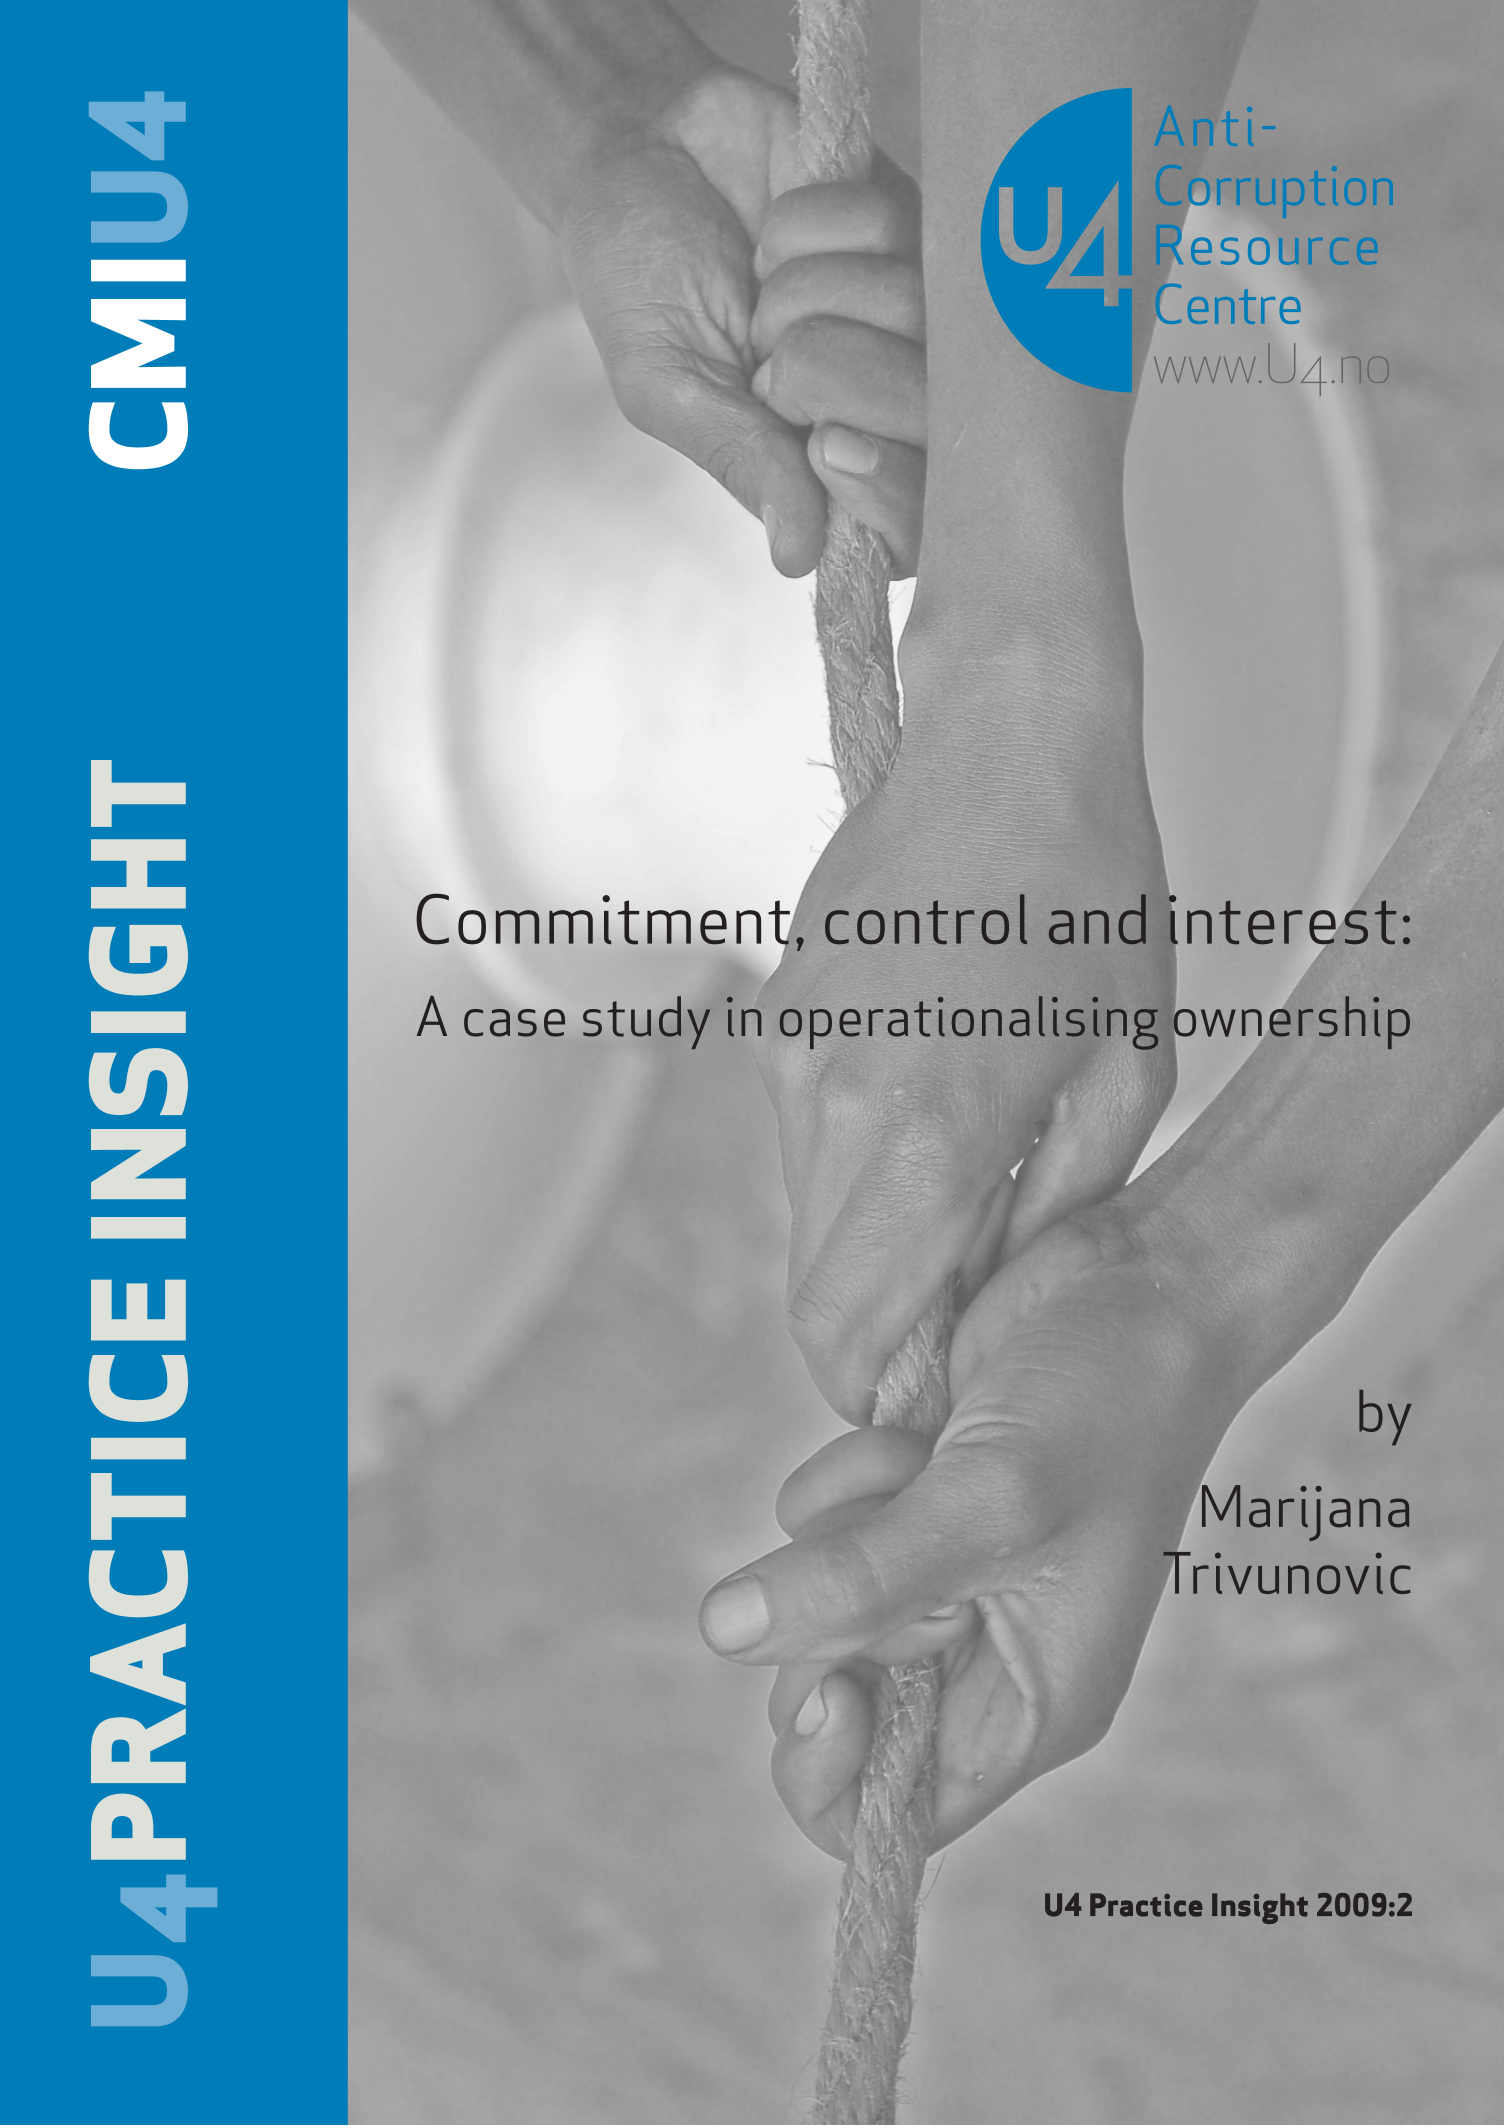 Commitment, control and interest: A case study in operationalising ownership